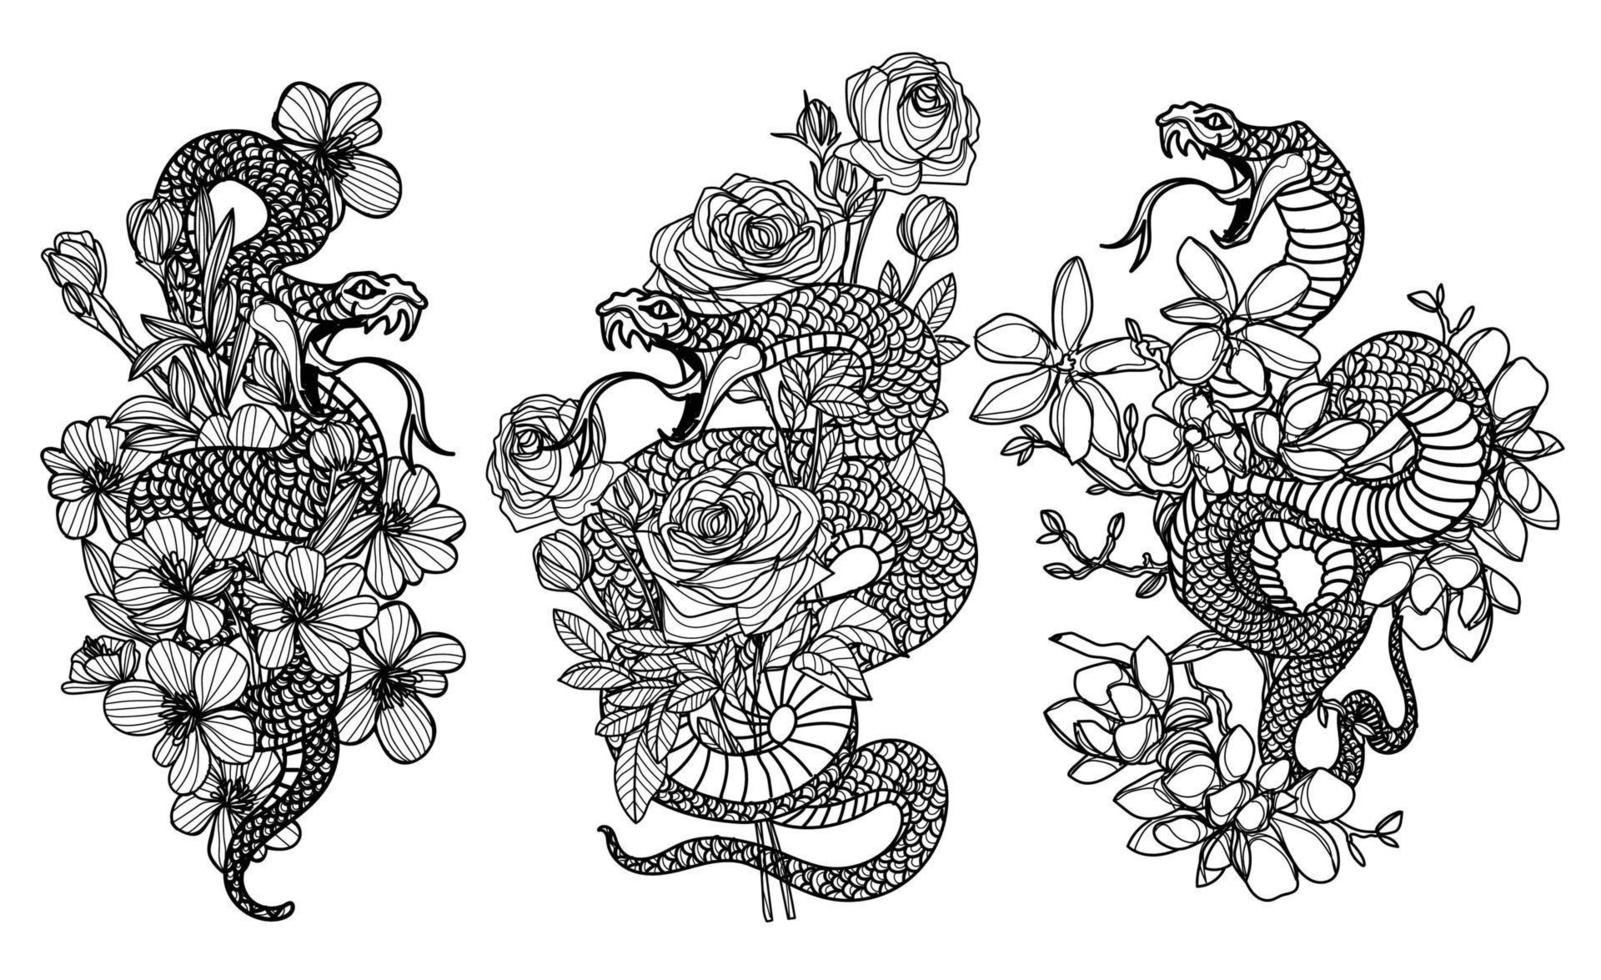 Tattoo art snak and flower drawing and sketch black and white vector